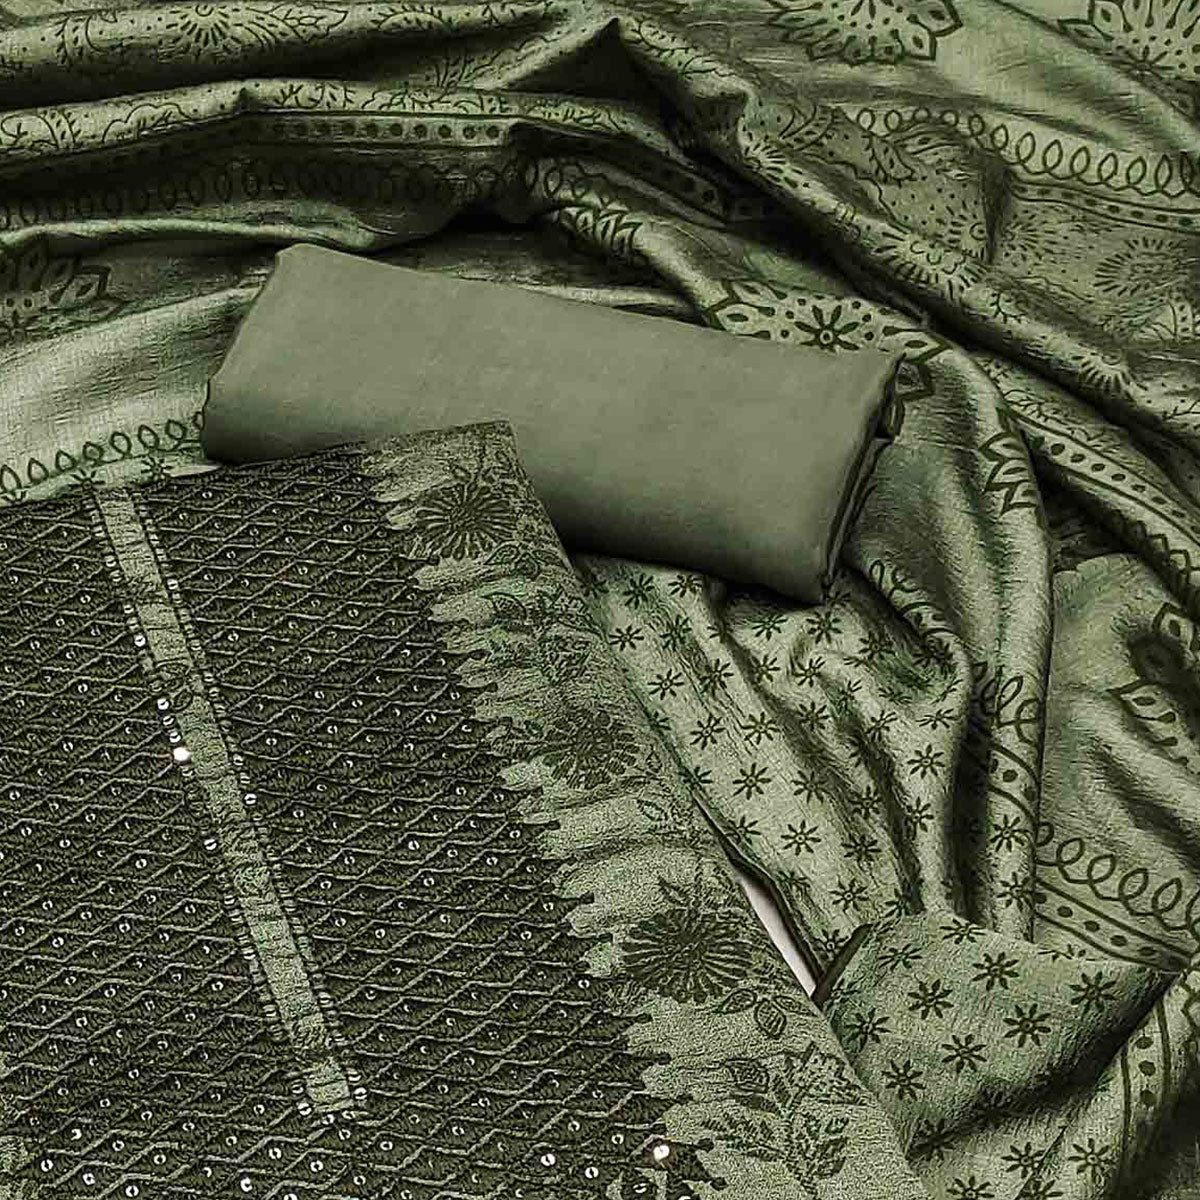 Green Sequins Embroidered Vichitra Silk Dress Material